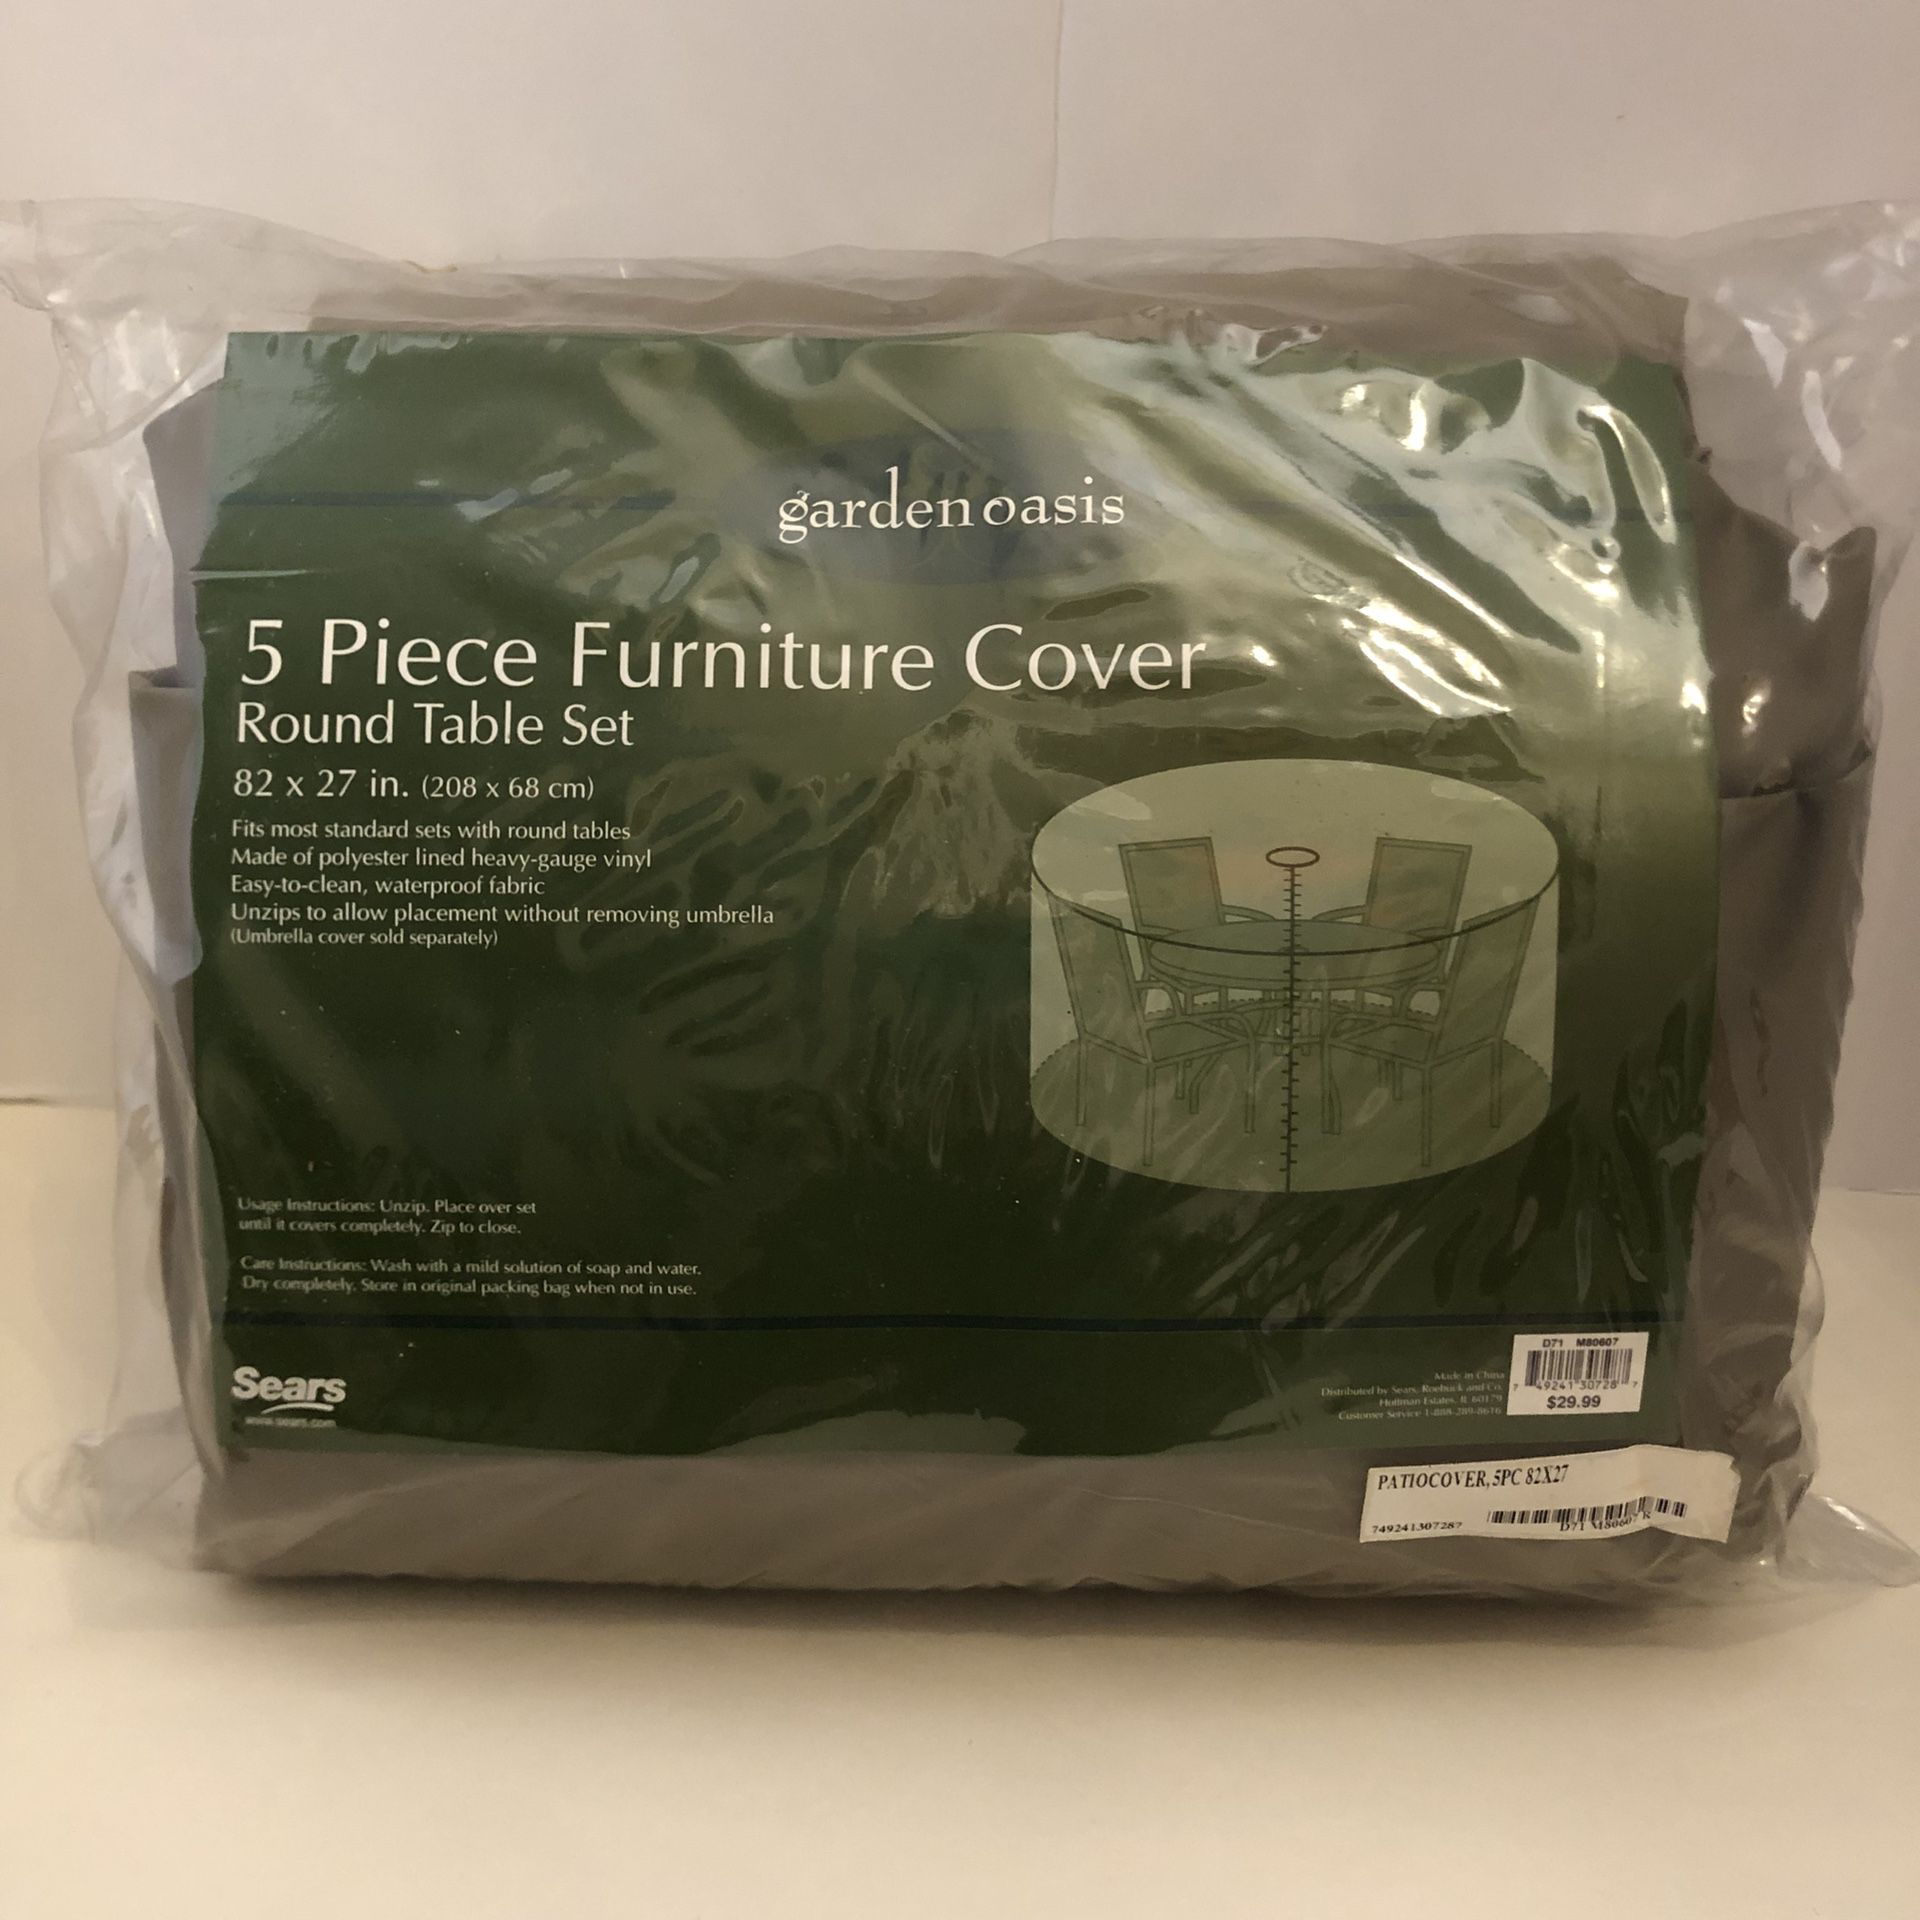 Furniture Cover, Outdoor, Waterproof, For Round Table and 4 Chairs, 82” x 27”, $8